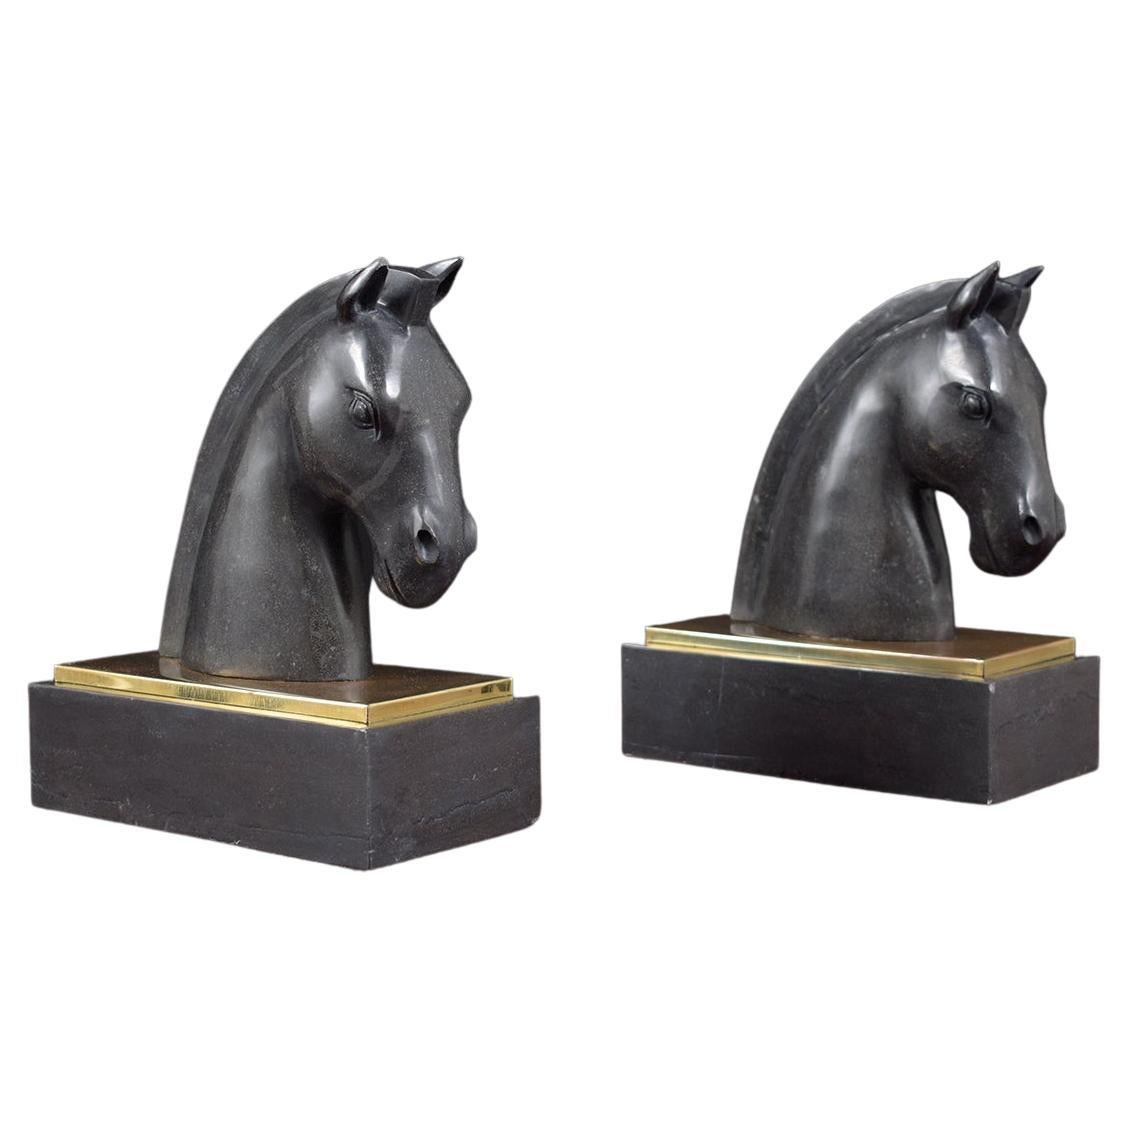 Unique Vintage 1950s Black Marble Horse Head Bookends with Brass Plate For Sale